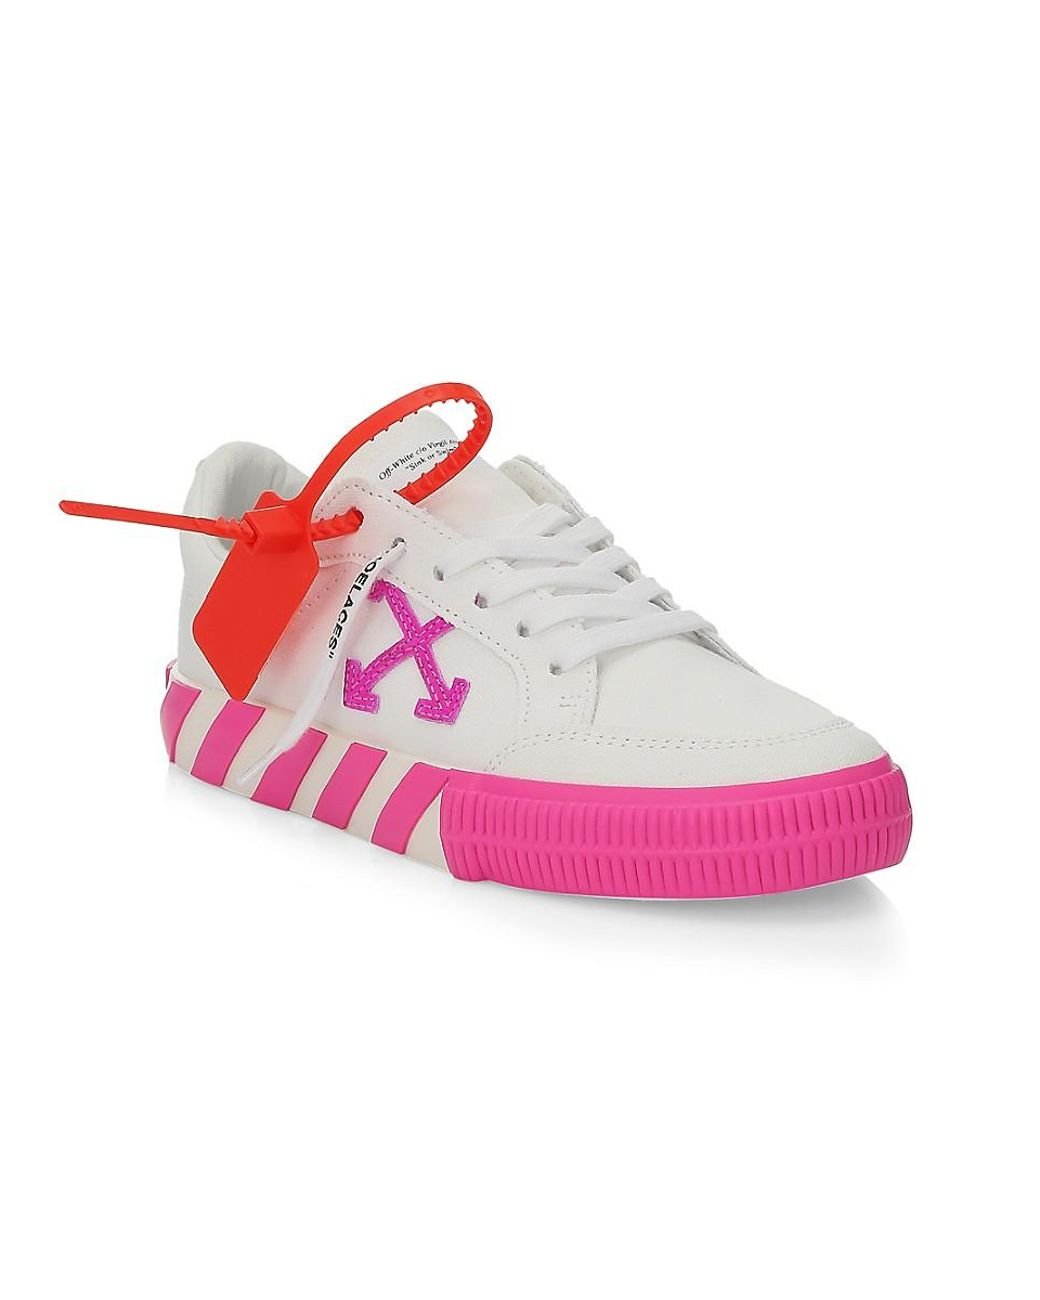 Off-White c/o Virgil Abloh Arrow Low-top Neon Canvas Sneakers in Pink | Lyst